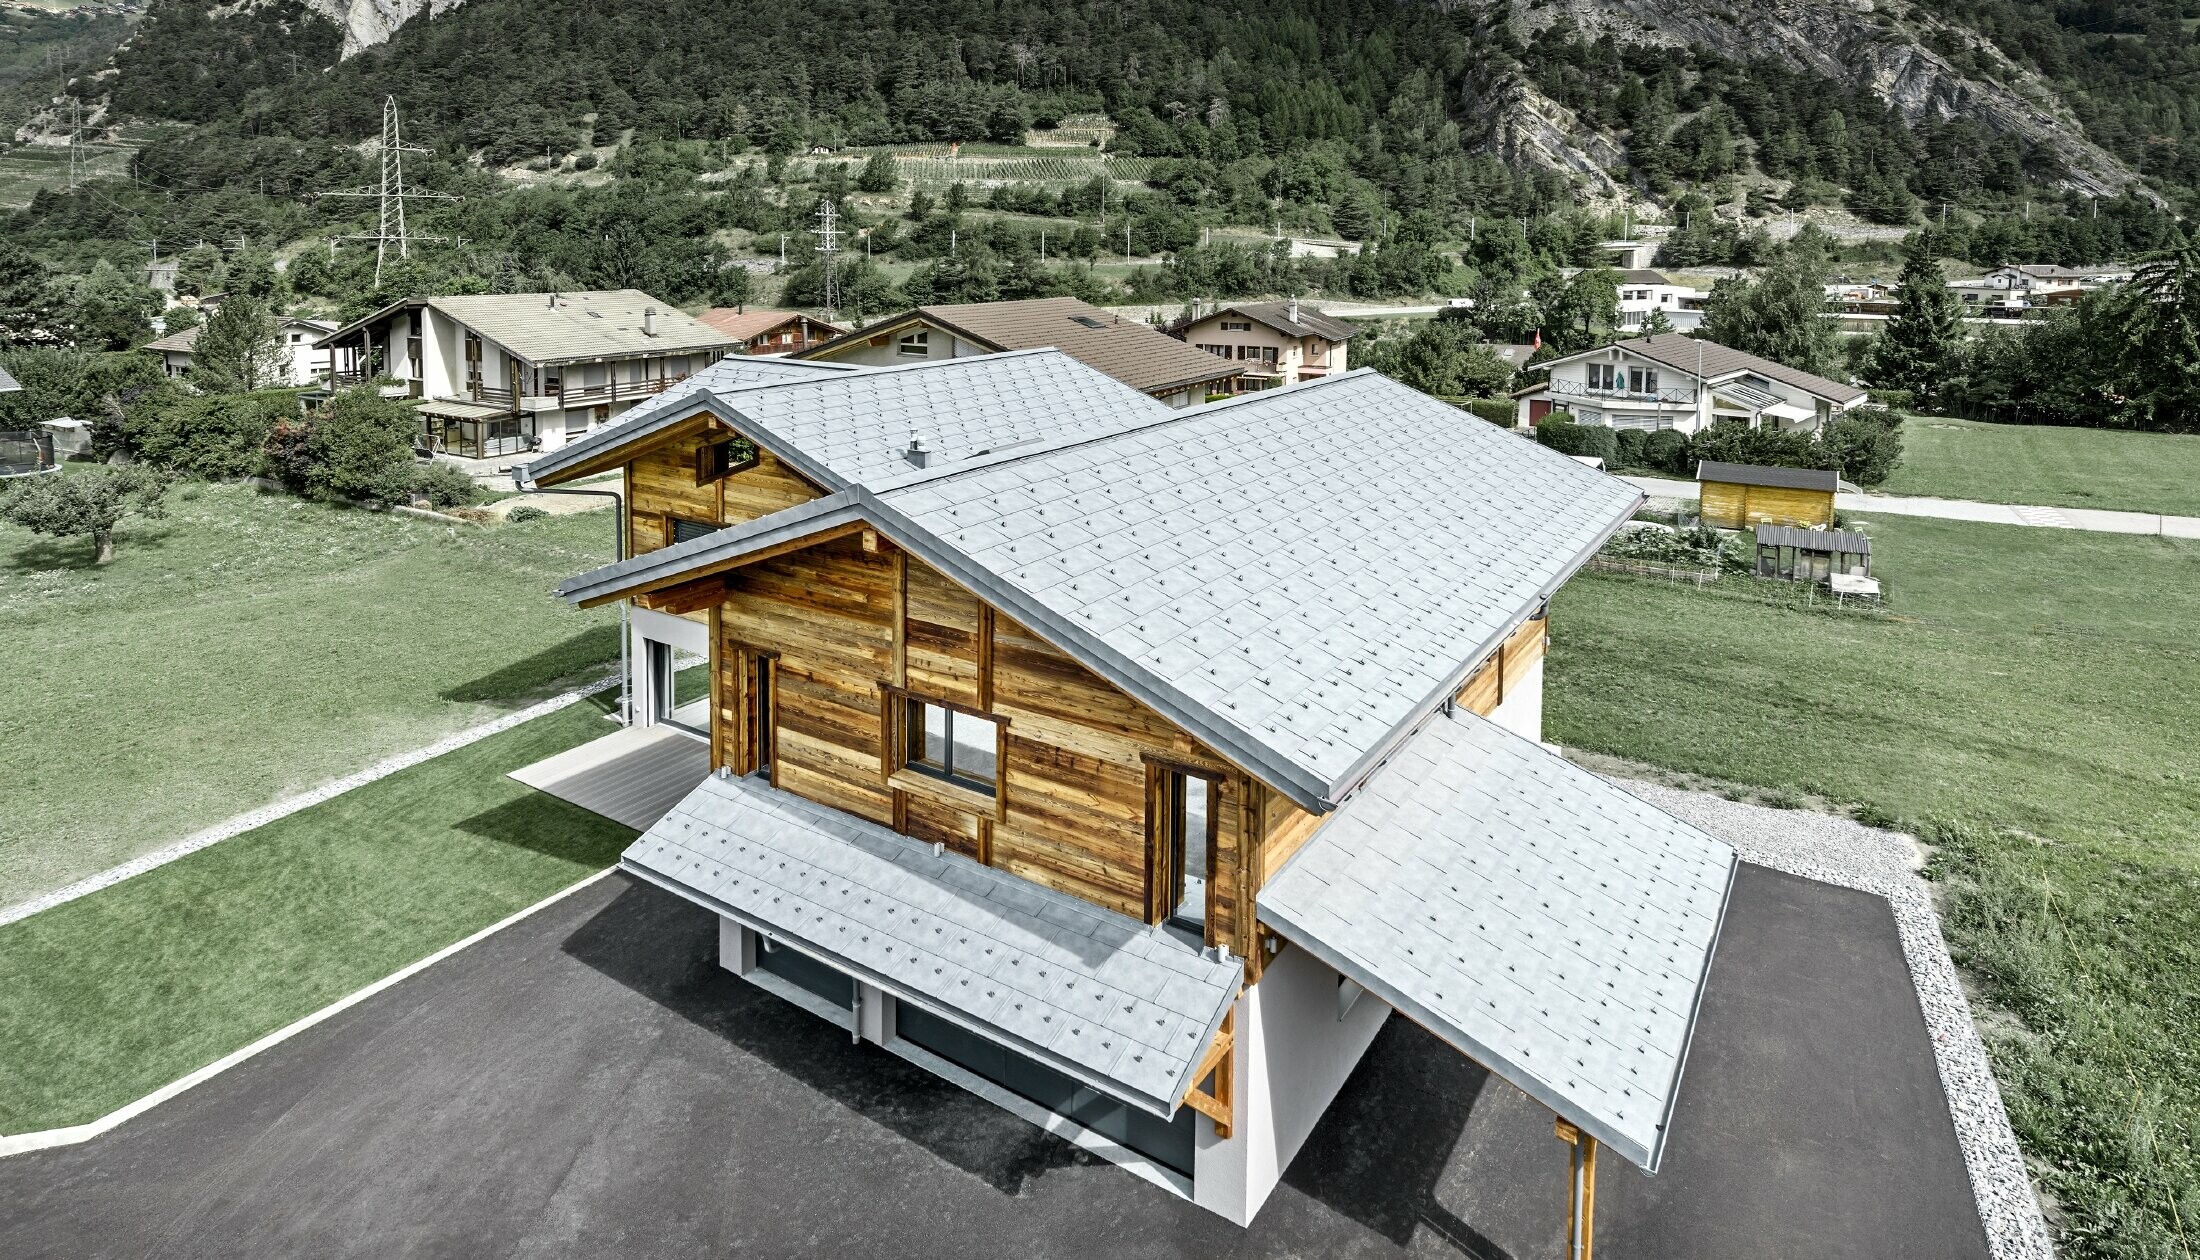 Aerial view of Chalet Fabrice. The cottage was clad in the PREFA R.16 roof tile in stone grey with snow guards. The upper part of the building is clad in a rustic wooden façade.